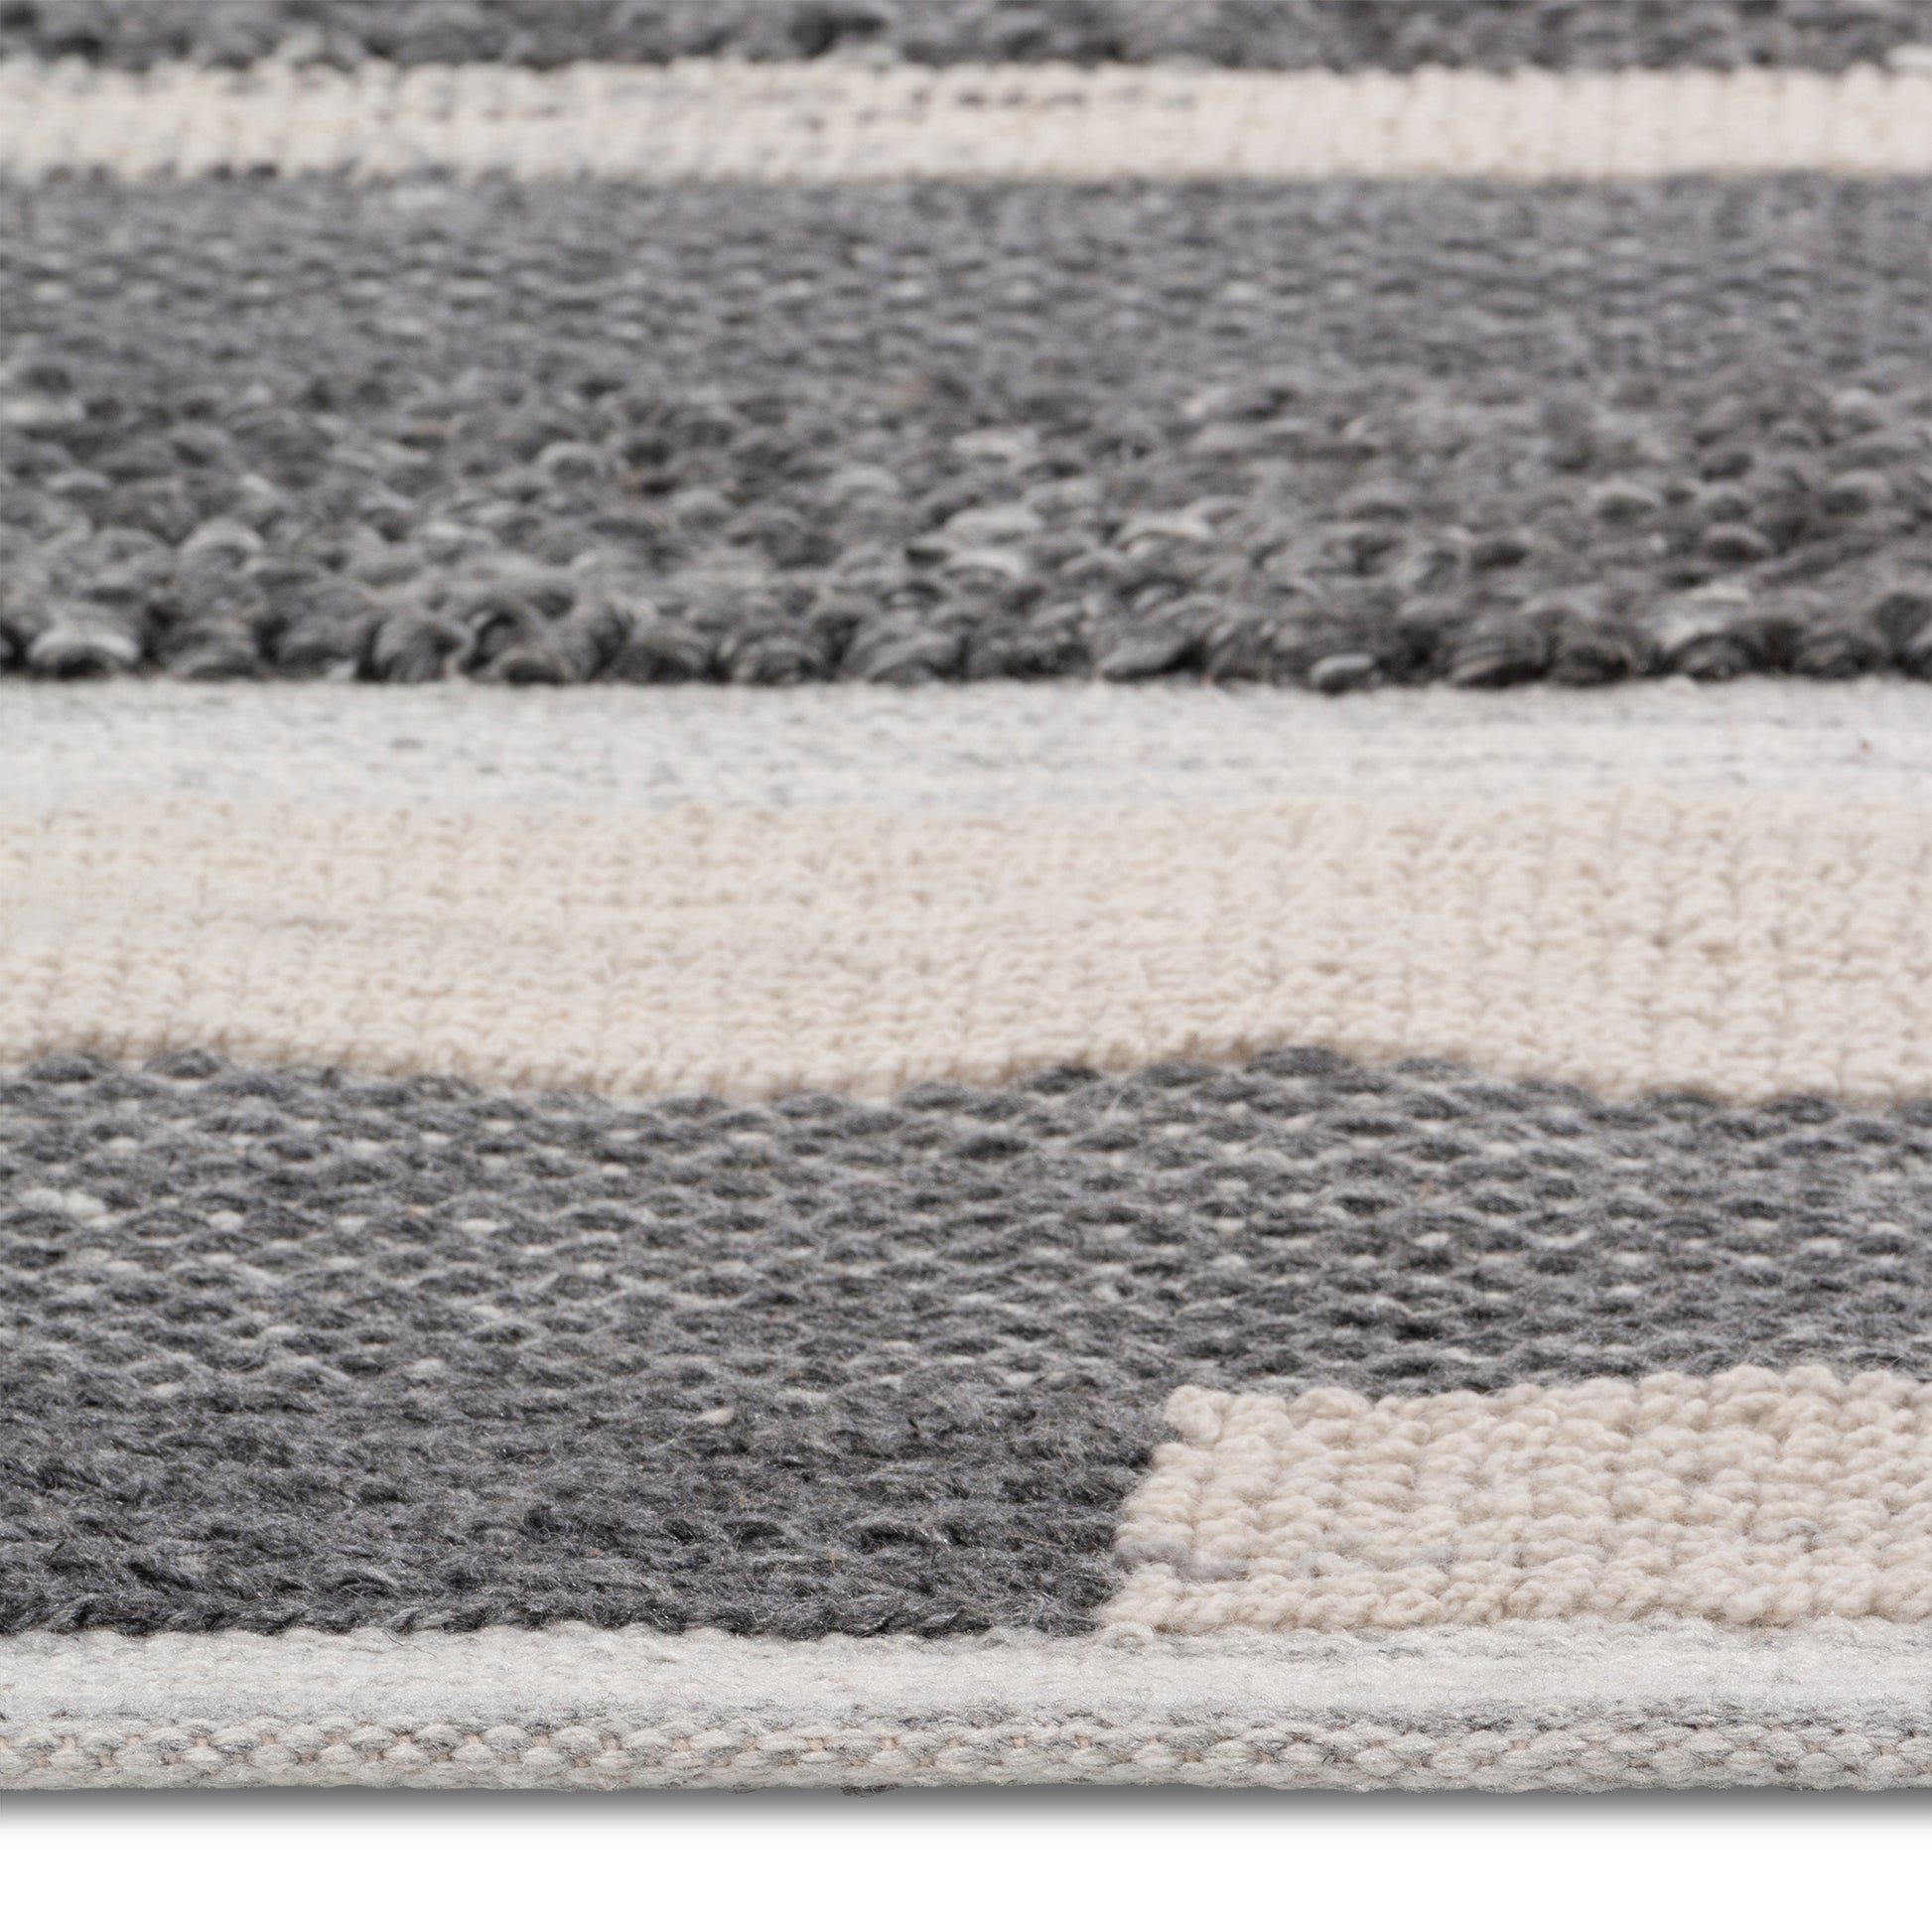 Easy Rugs Hygge Hand Woven Charcoal Rug